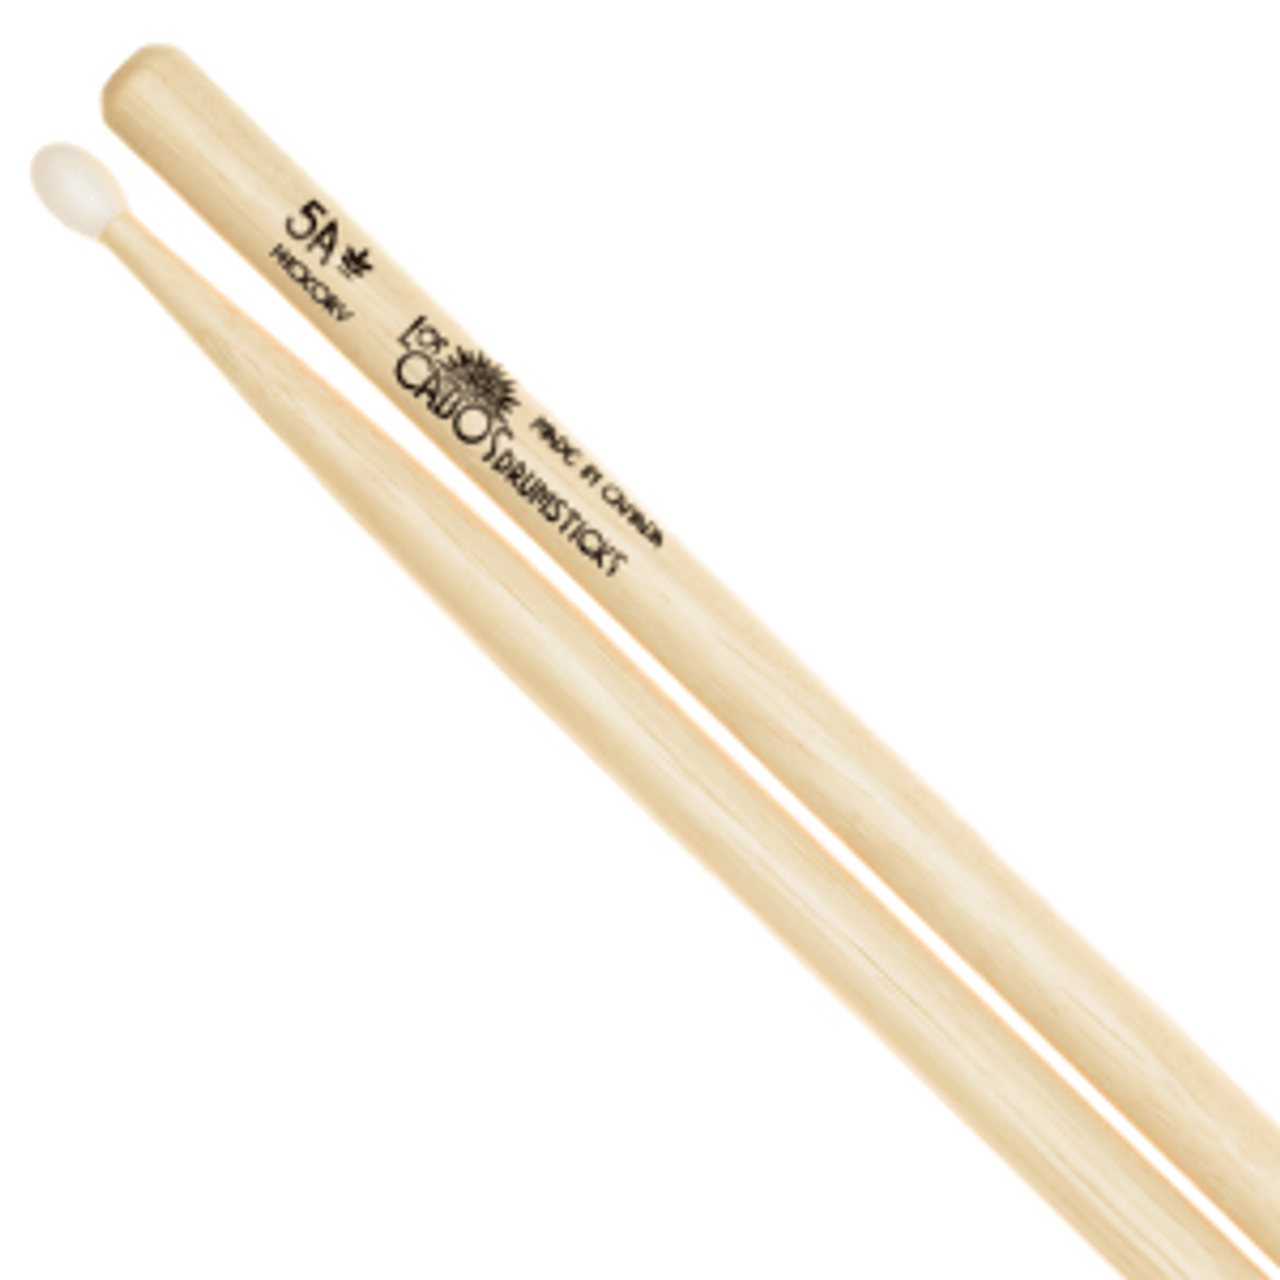 Los Cabos Drumstick 5BN Hickory Nylon Tip